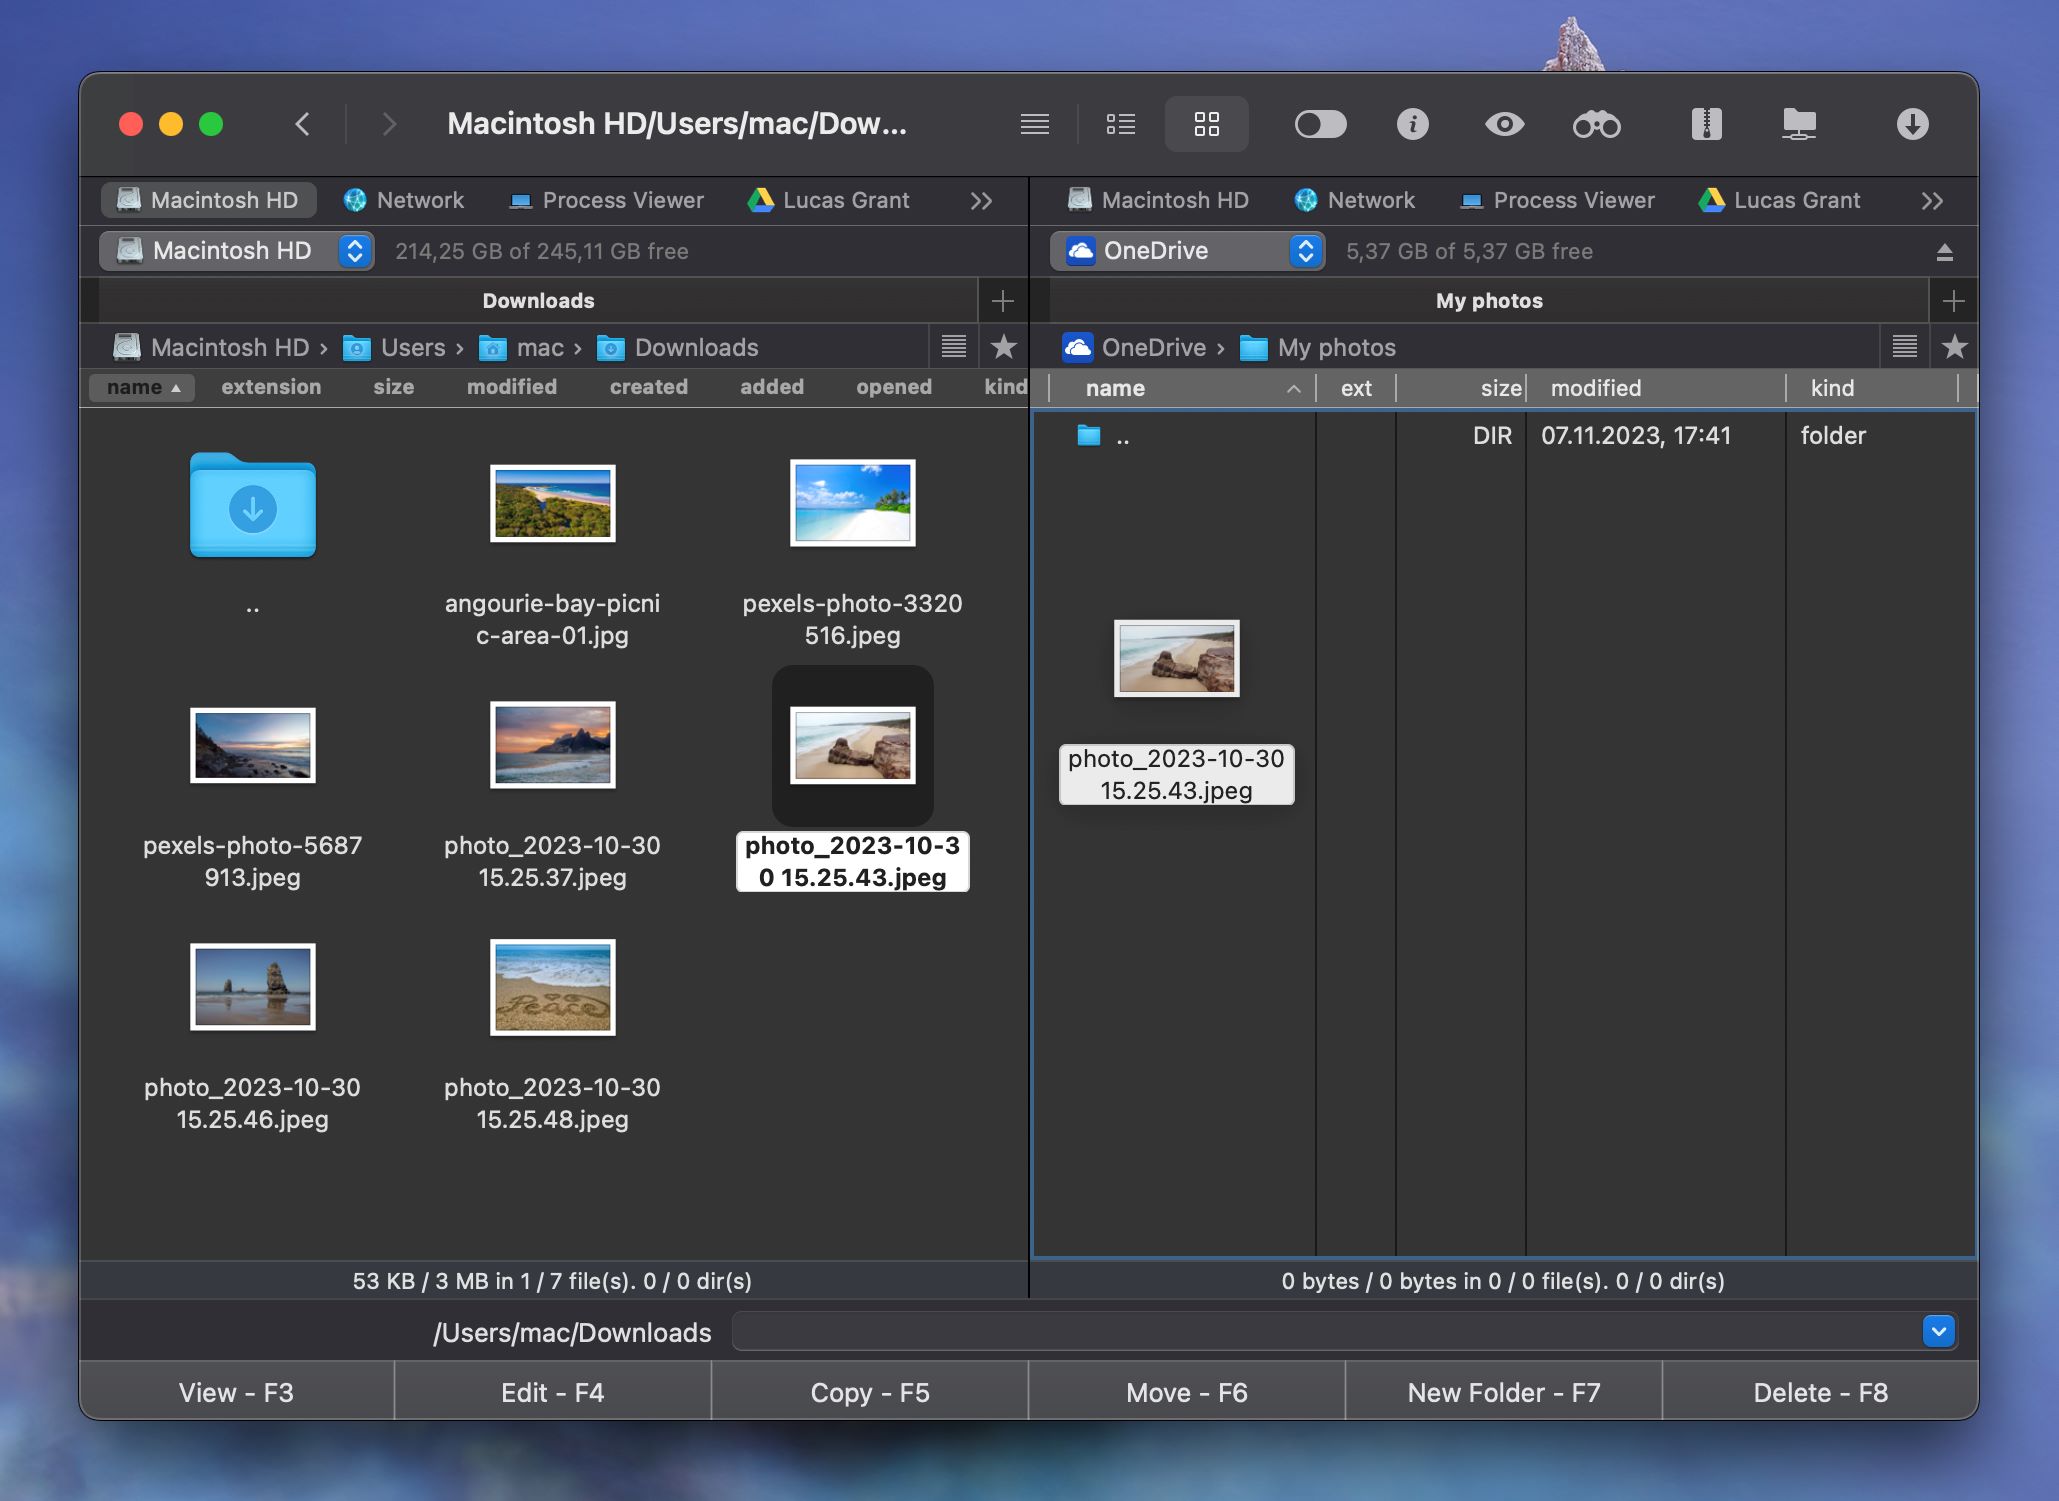 Dual-pane file manager interface for Mac.